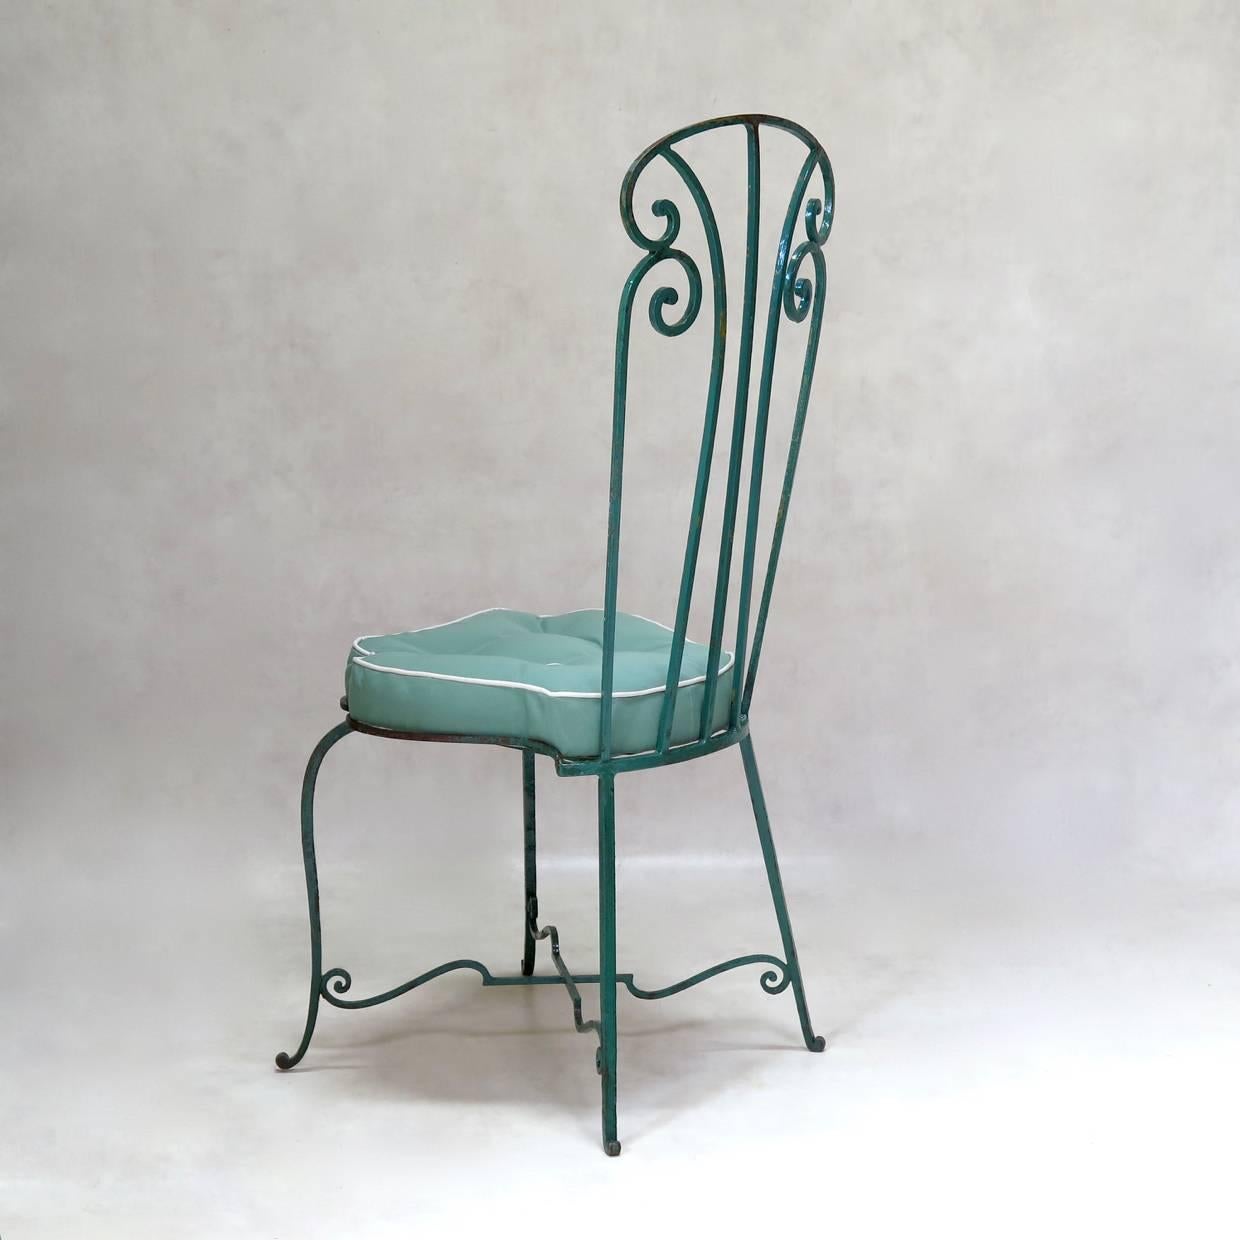 Set of Seven Art Nouveau Iron Chairs with Flower Seats, France, circa 1920s For Sale 1